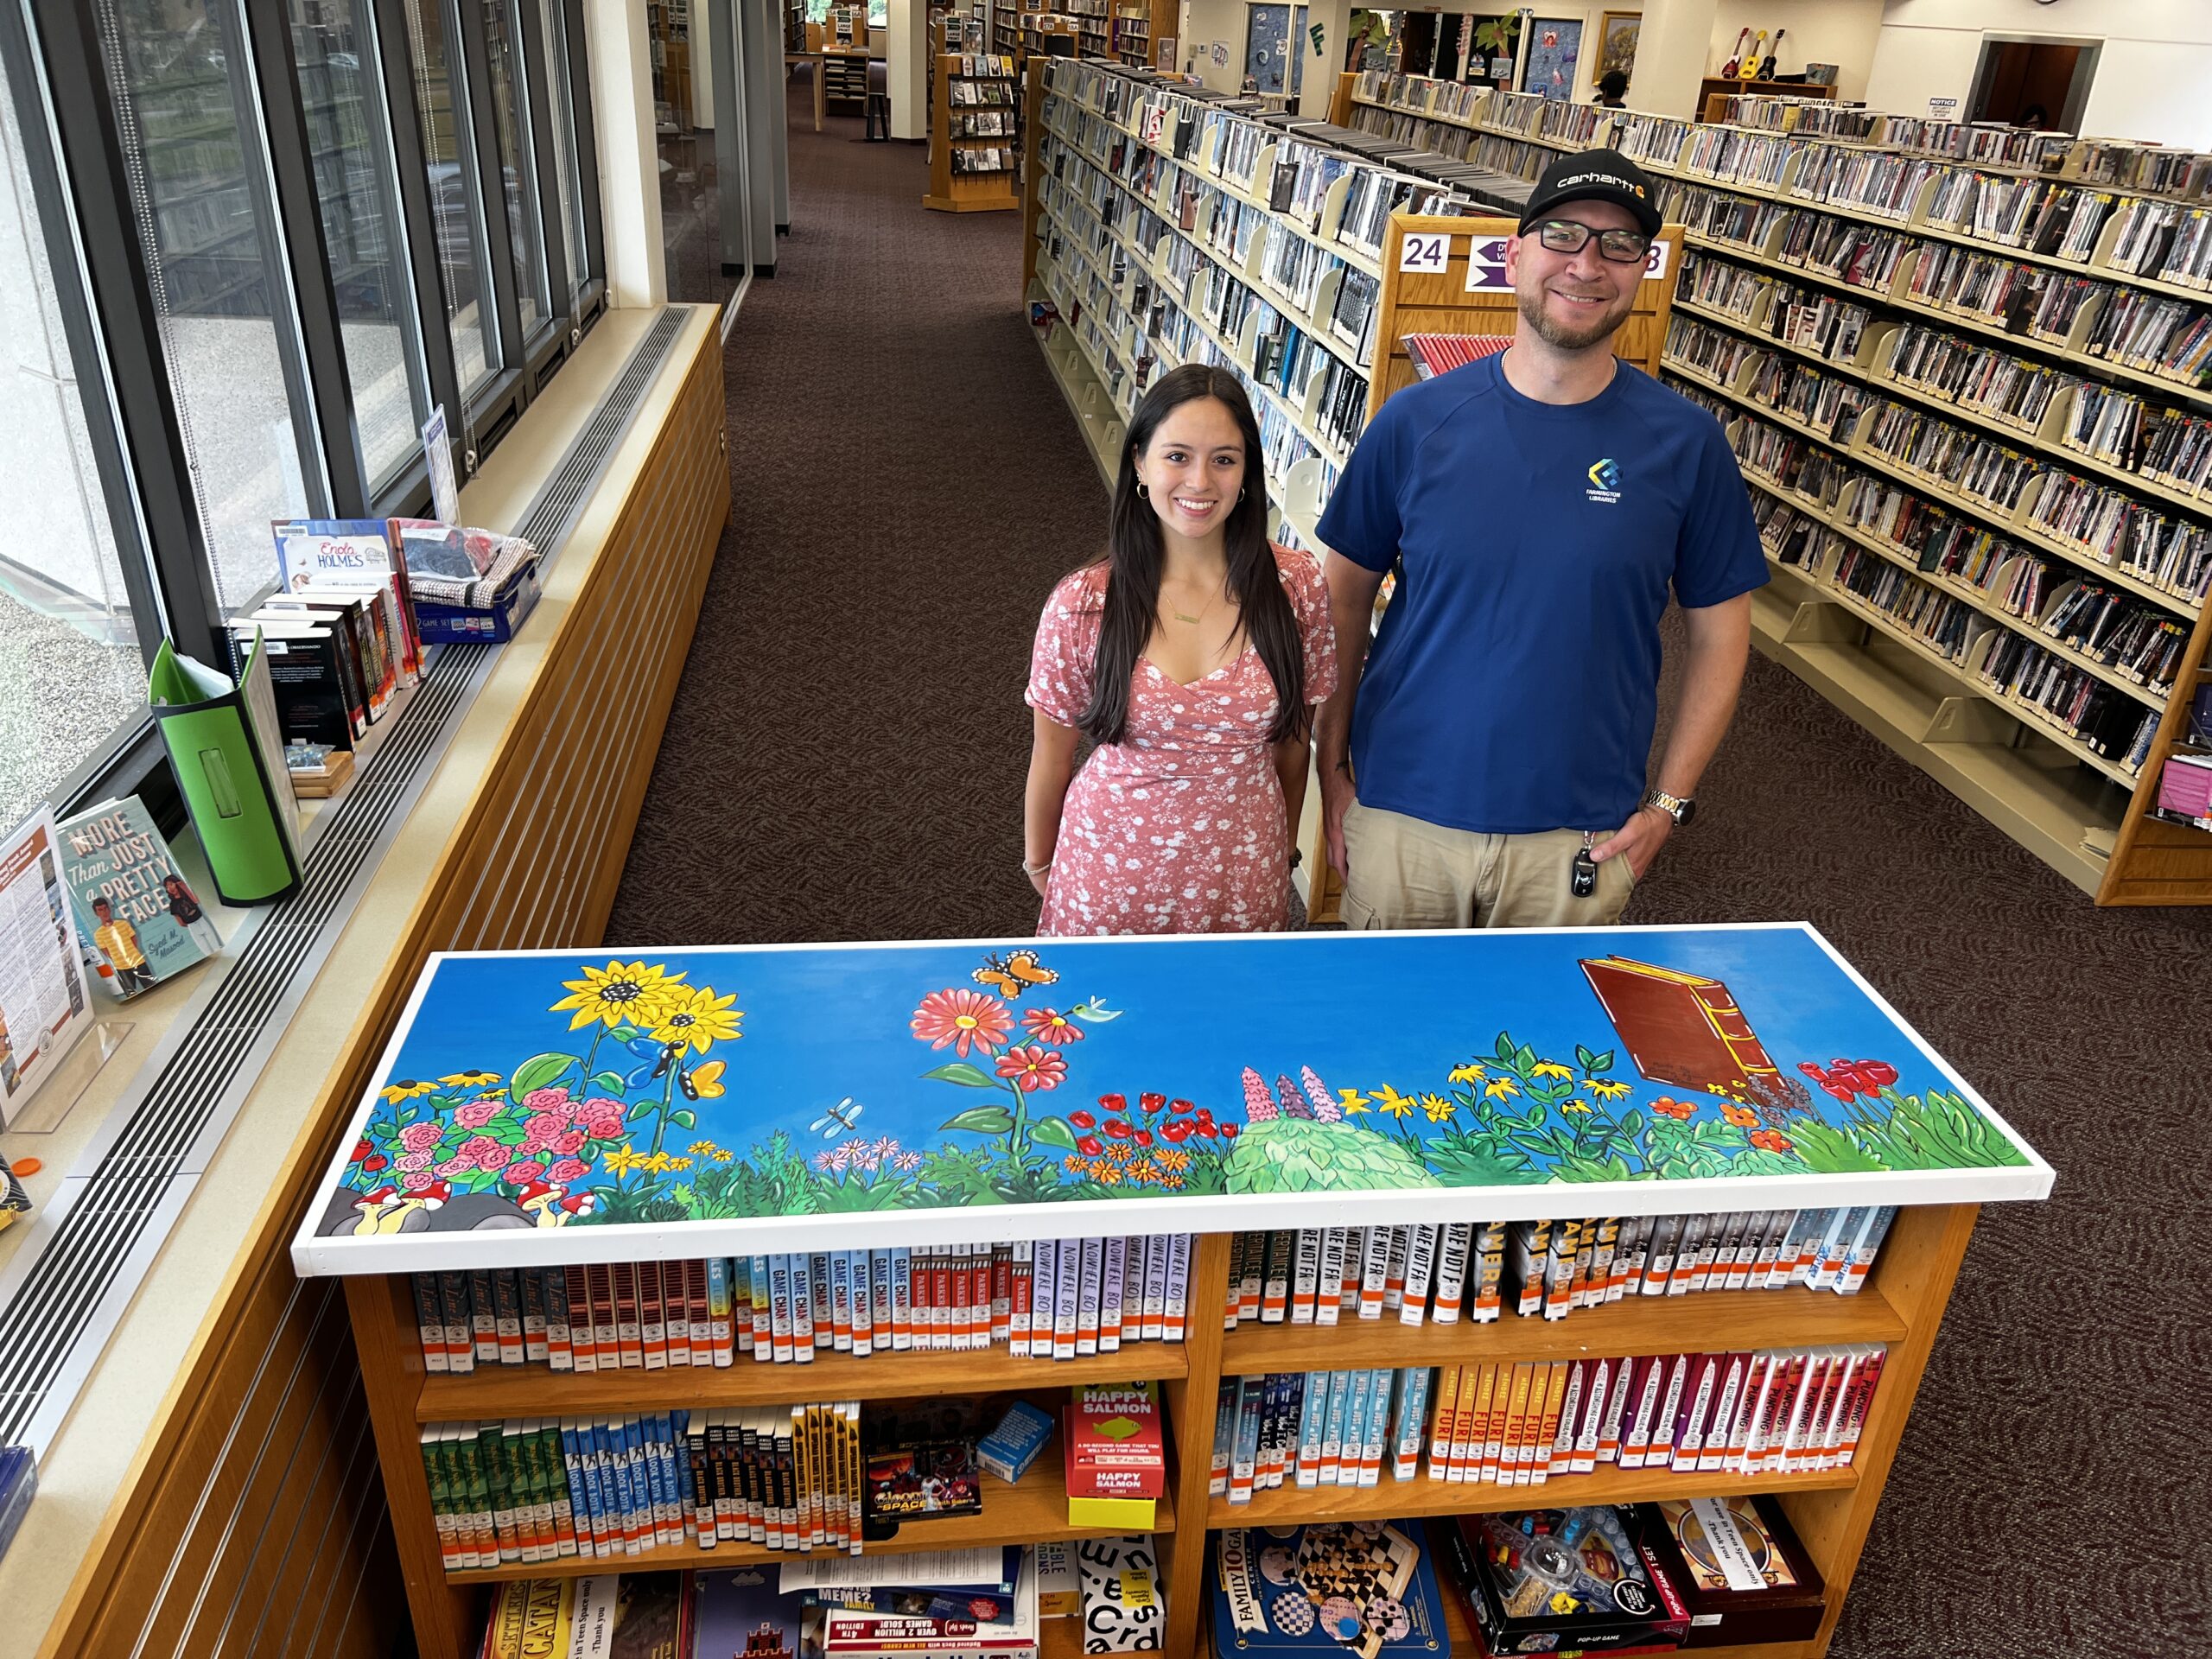 Students Standing in Front of Painting at Library